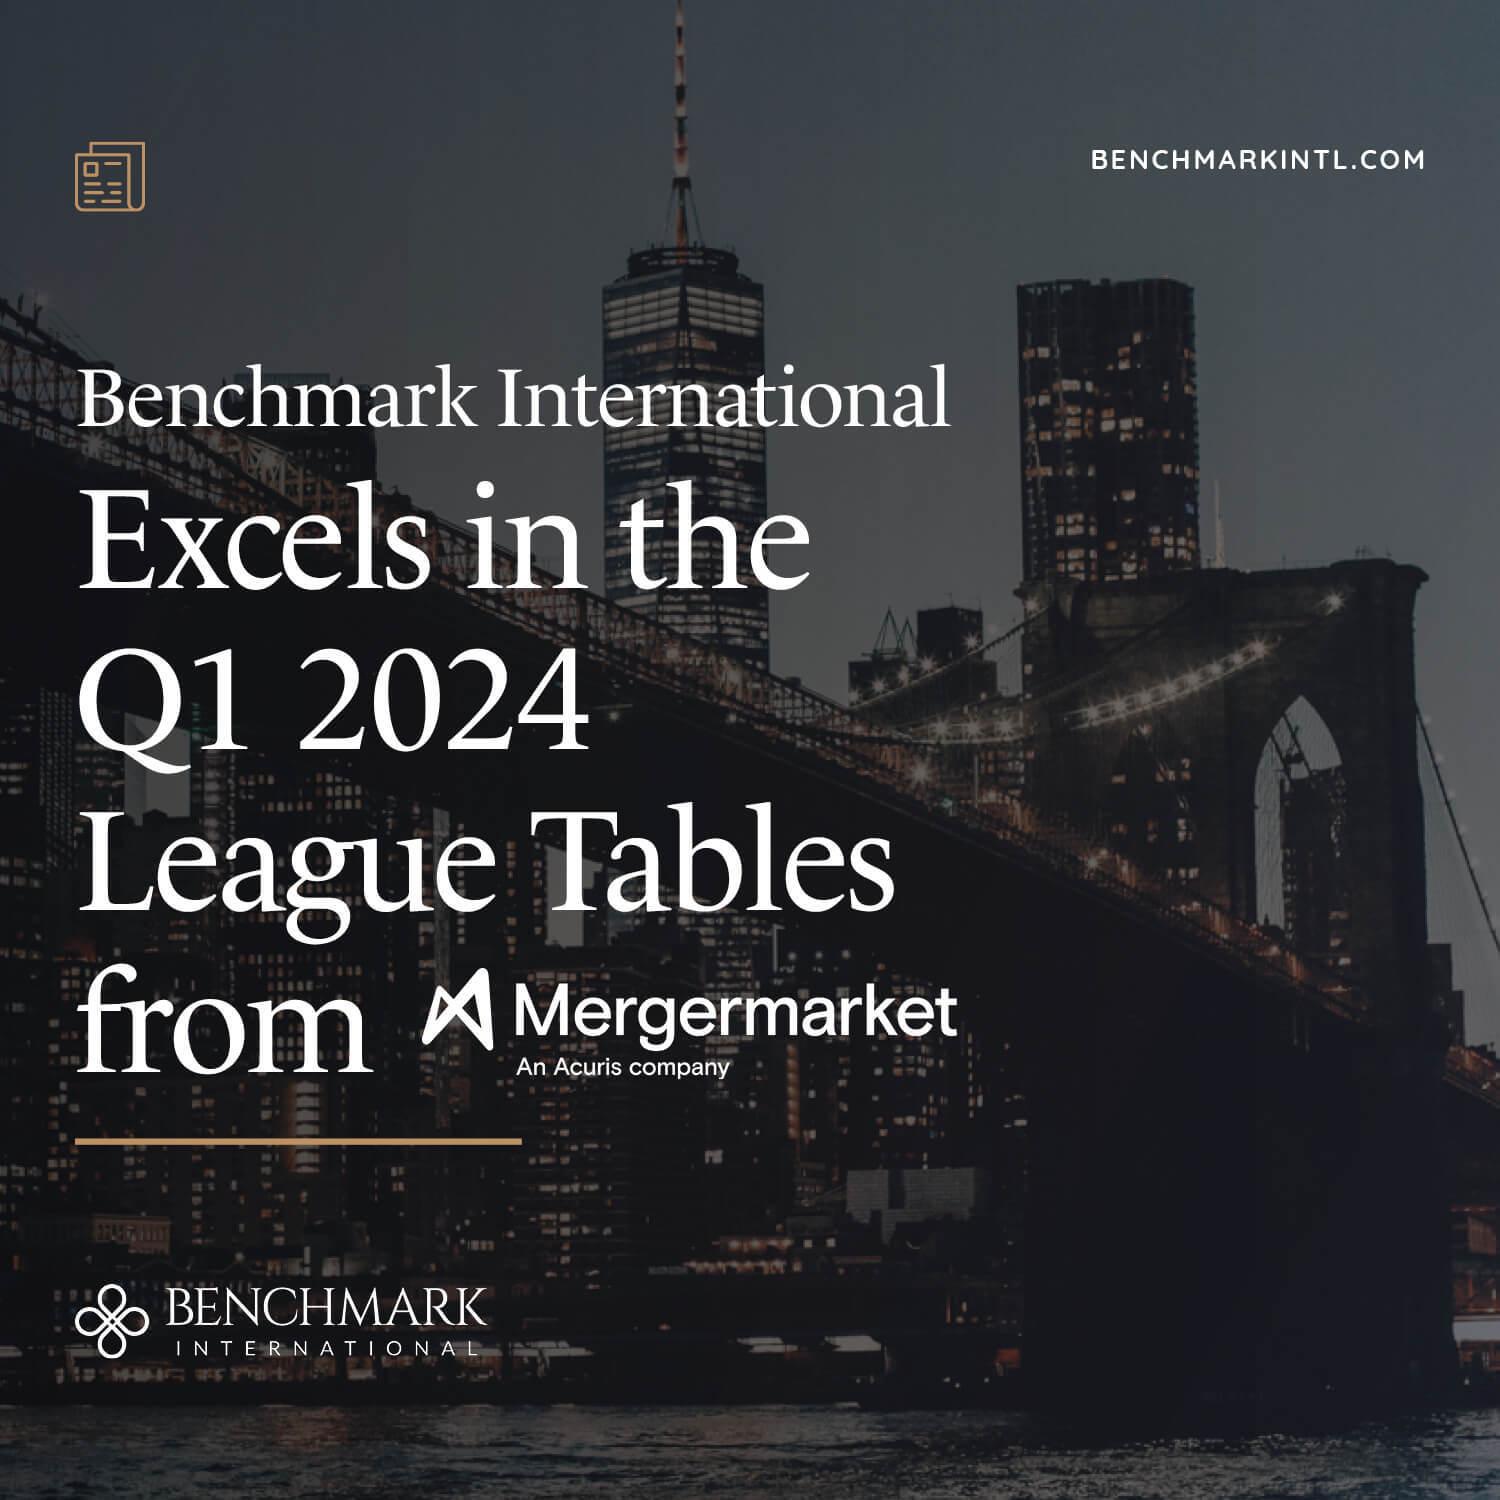 Benchmark International Excels in Mergermarket League Tables